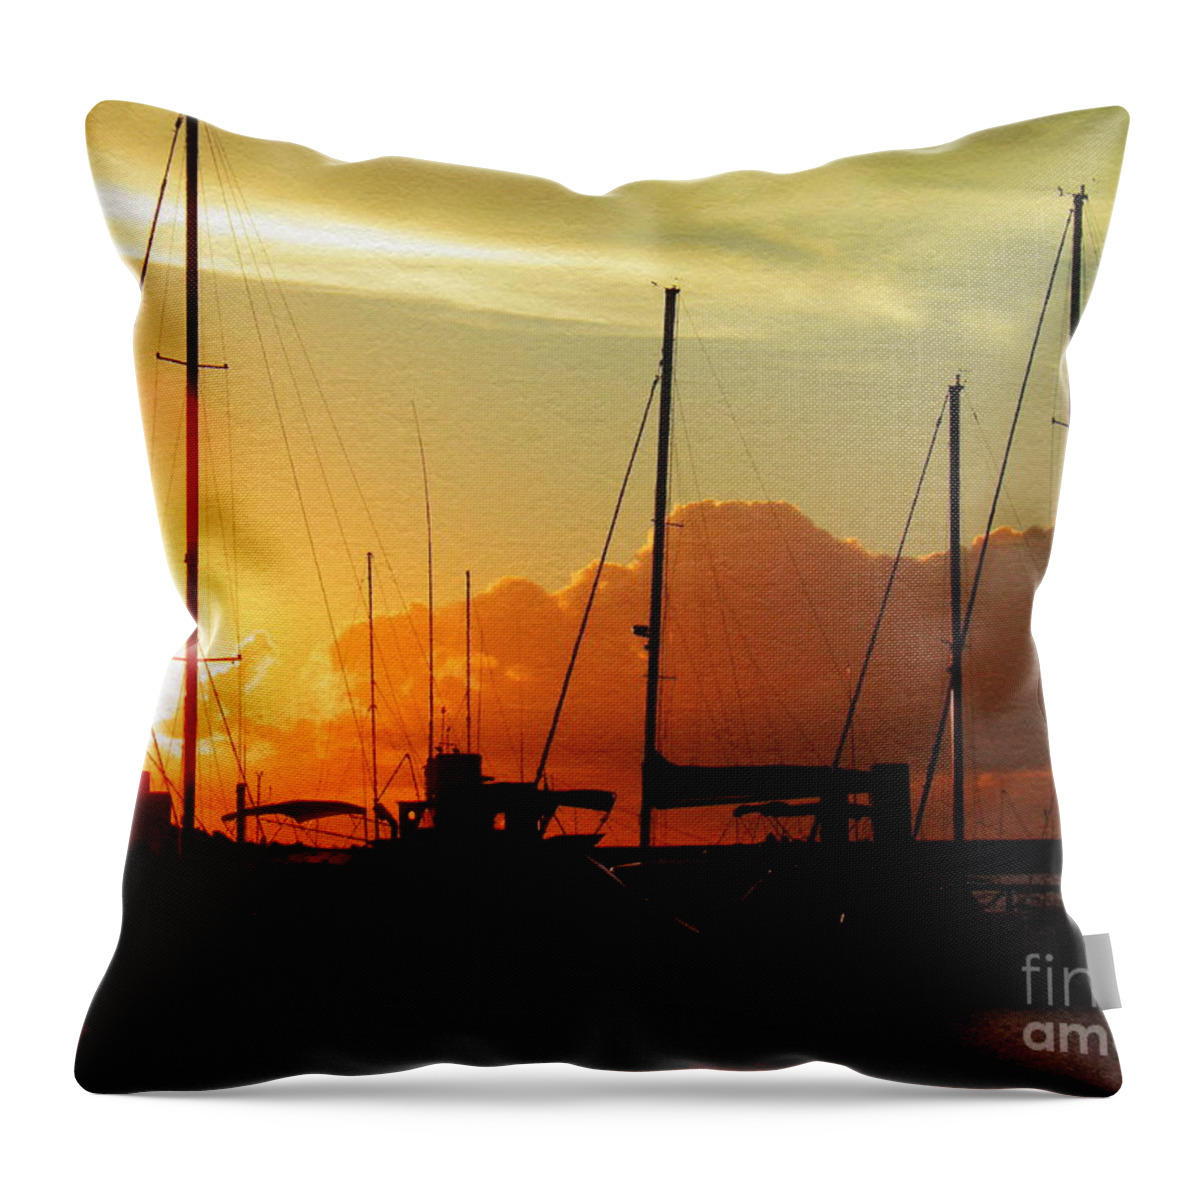 Hawaii Throw Pillow featuring the digital art Sunset In Paradise by Dorlea Ho